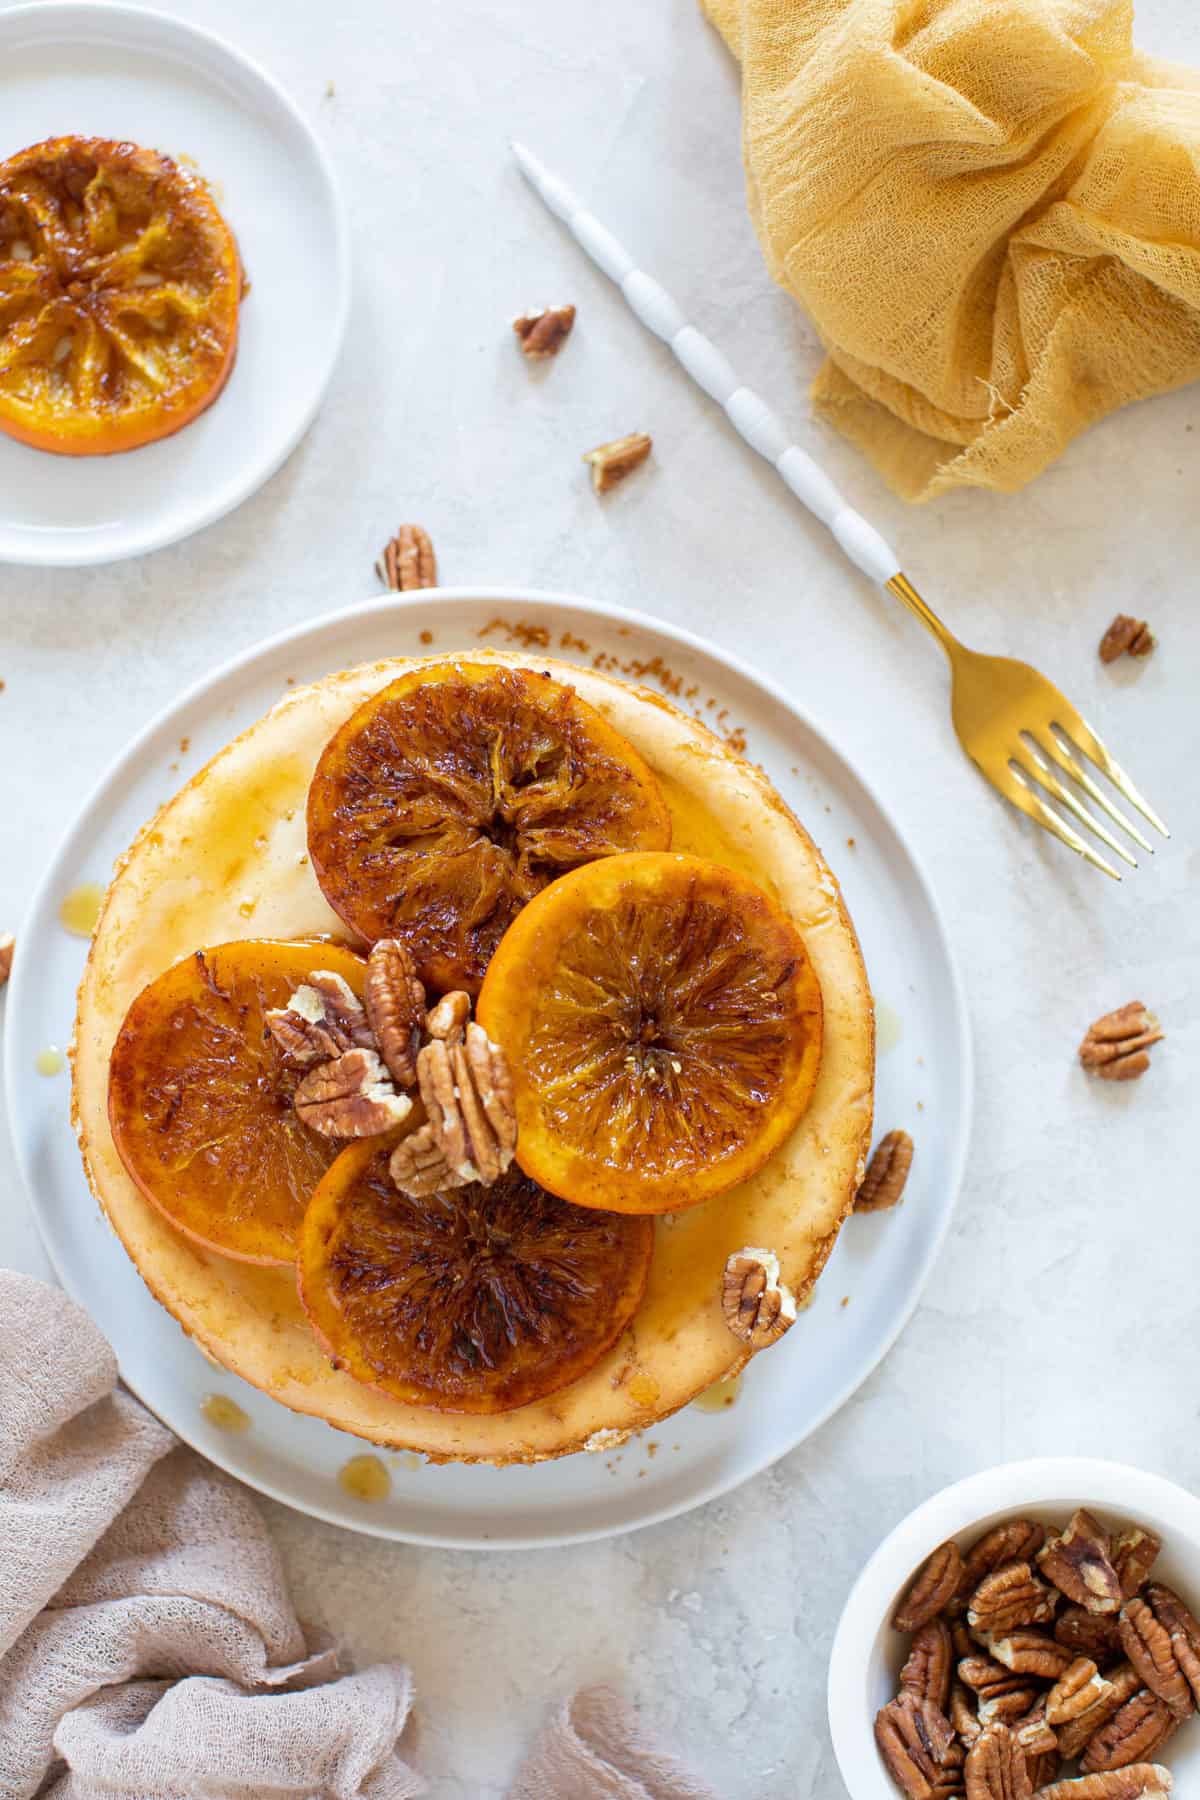 Spiced Orange Cheesecake with Pecan Crust